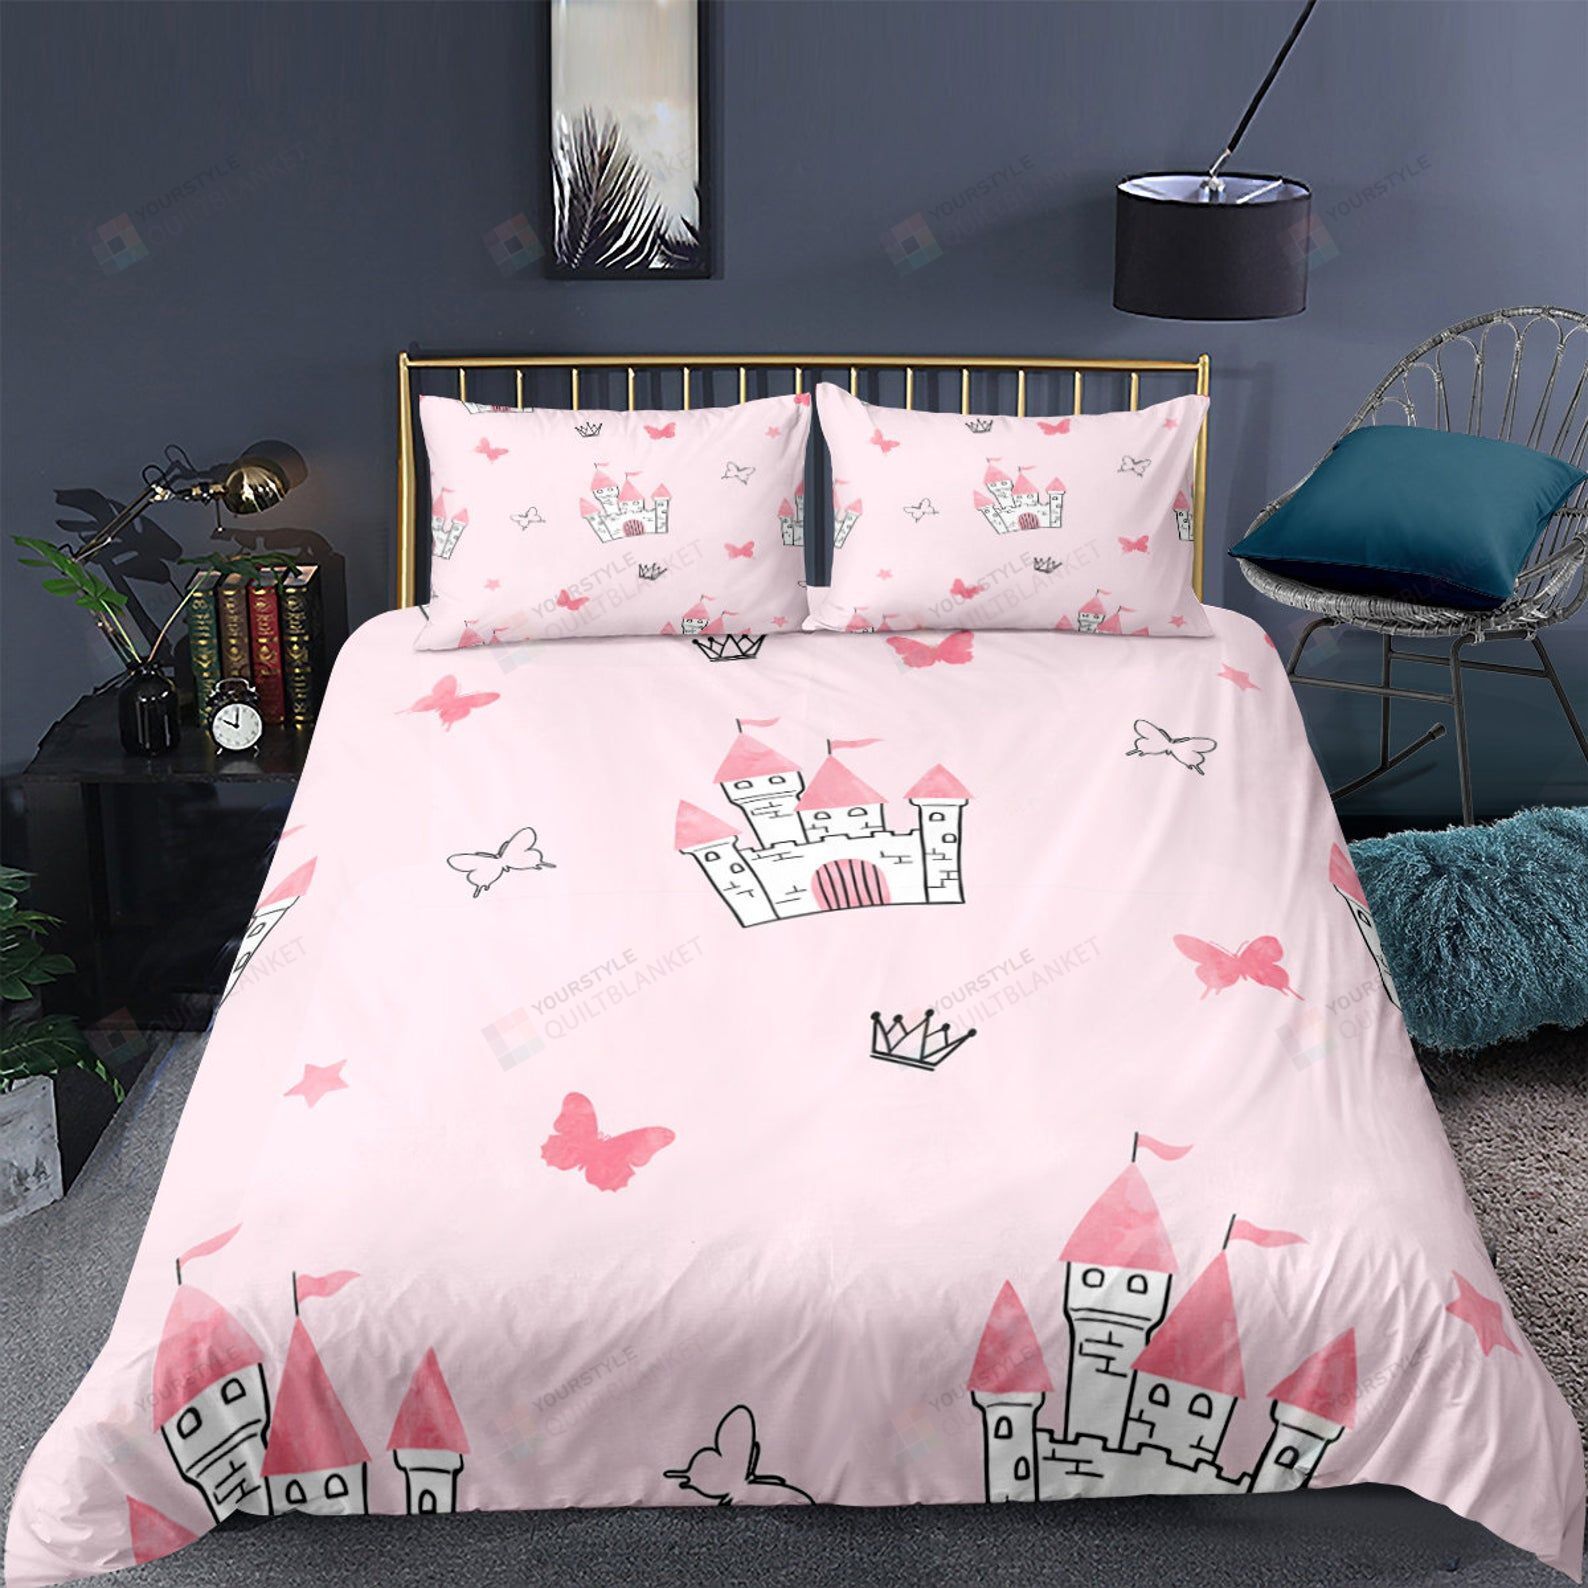 Butterfly And Palace Pink Bed Sheets Duvet Cover Bedding Sets